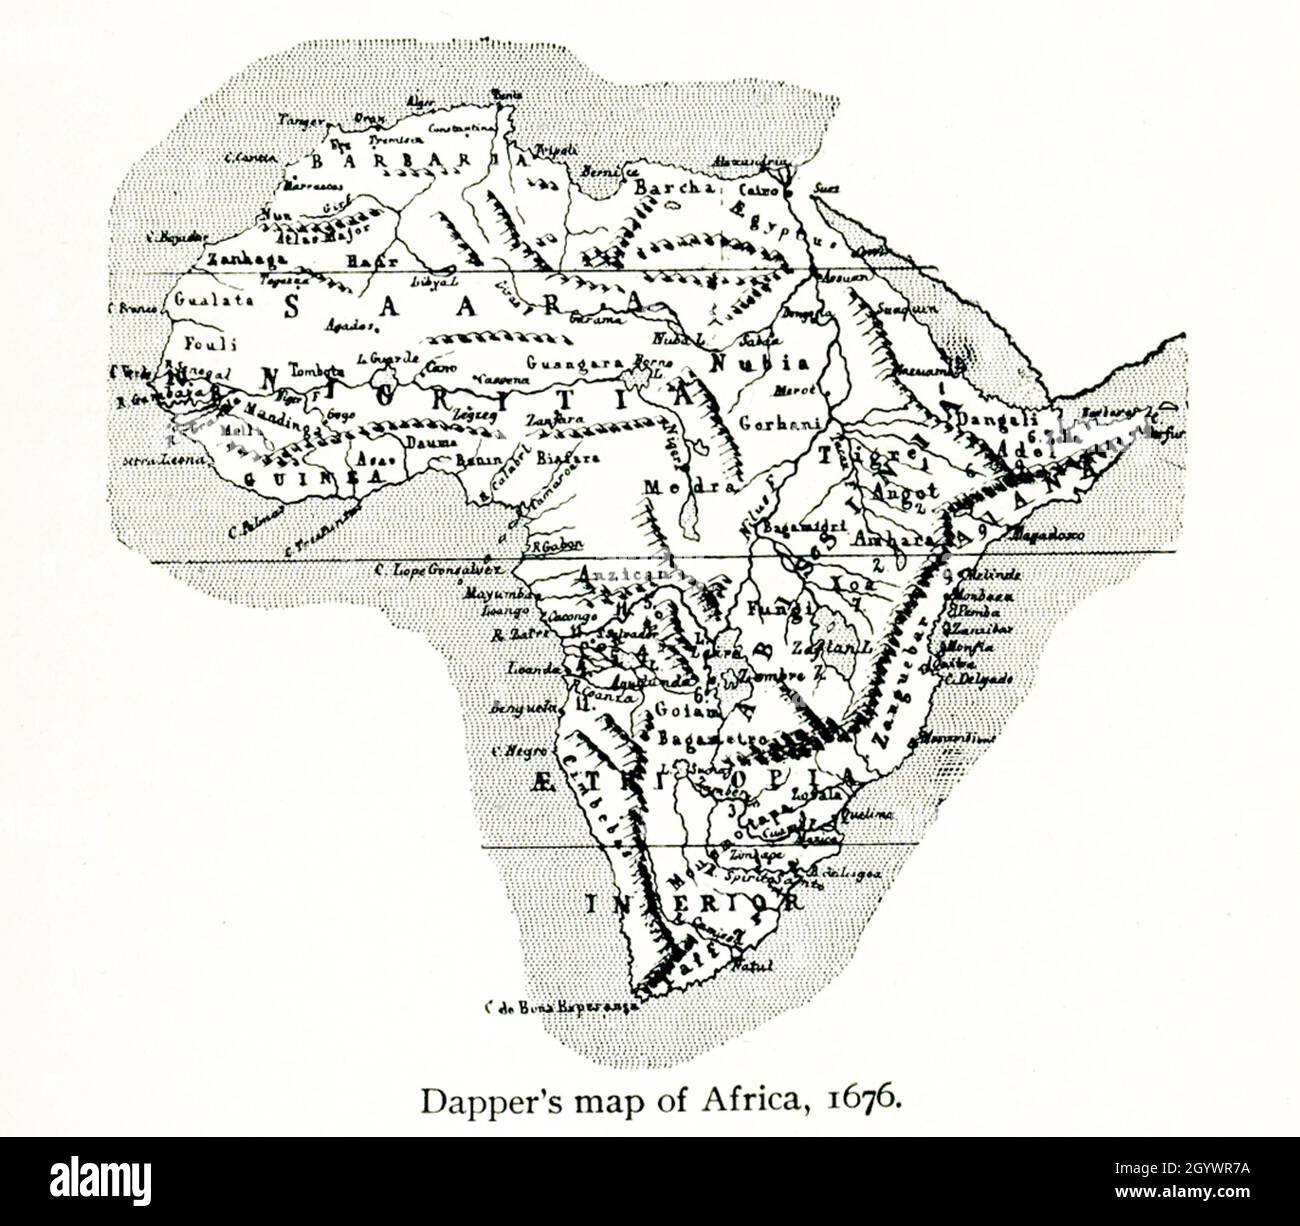 This map of Dapper shows Africa in 1686. Olfert Dapper (1636 –1689) was a Dutch physician and writer. He wrote books about world history and geography, although he never traveled outside the Netherlands. His “Description of Africa,” published in 1668), is a key text for African studies – and this map accompanied the text. Stock Photo